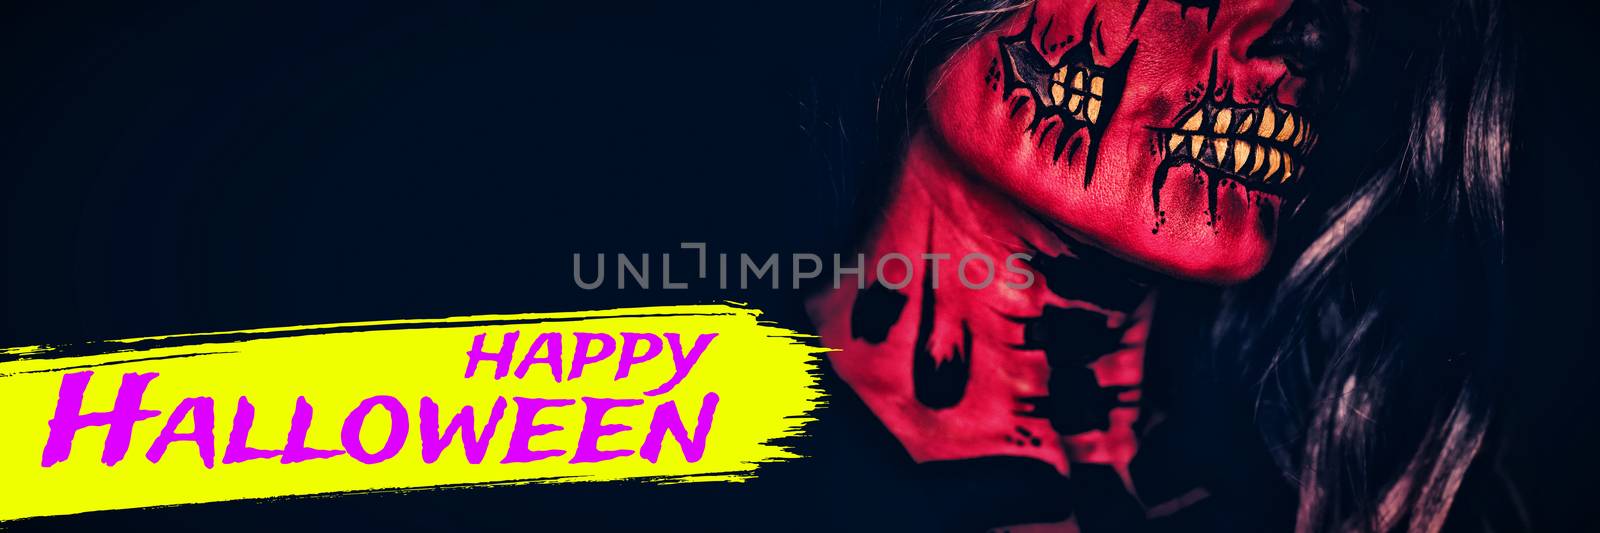 Digital image of happy Halloween text against attractive young woman with halloween makeup